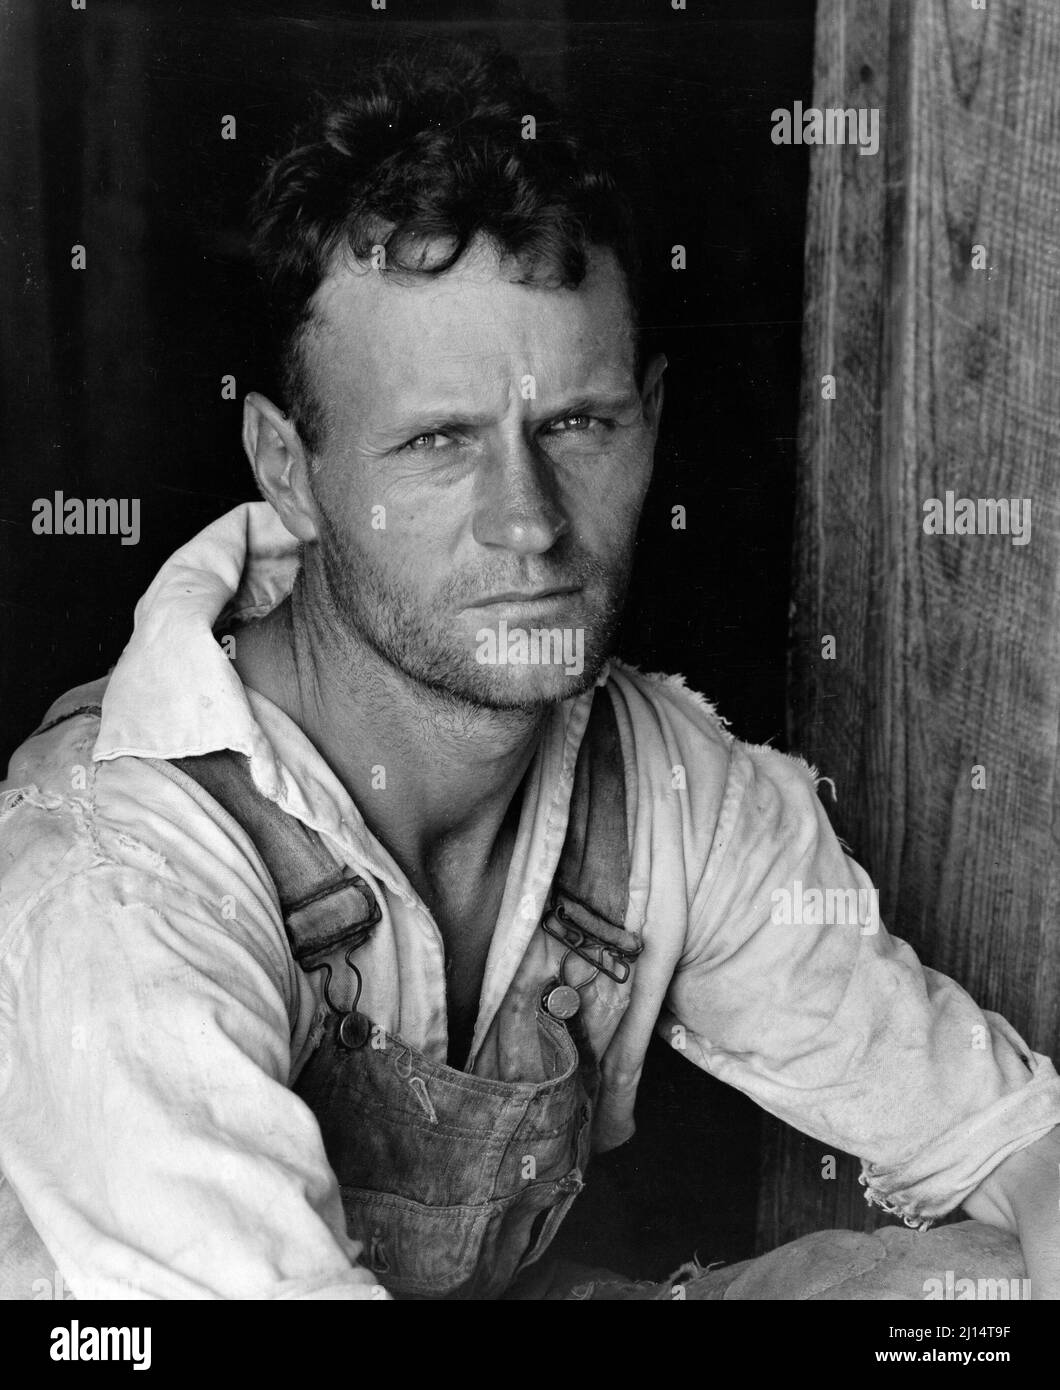 Alabama cotton farming in the Great Depression. Floyd Burroughs, A Cotton Sharecropper, Hale County, Alabama by Walker Evans, 1936 Stock Photo